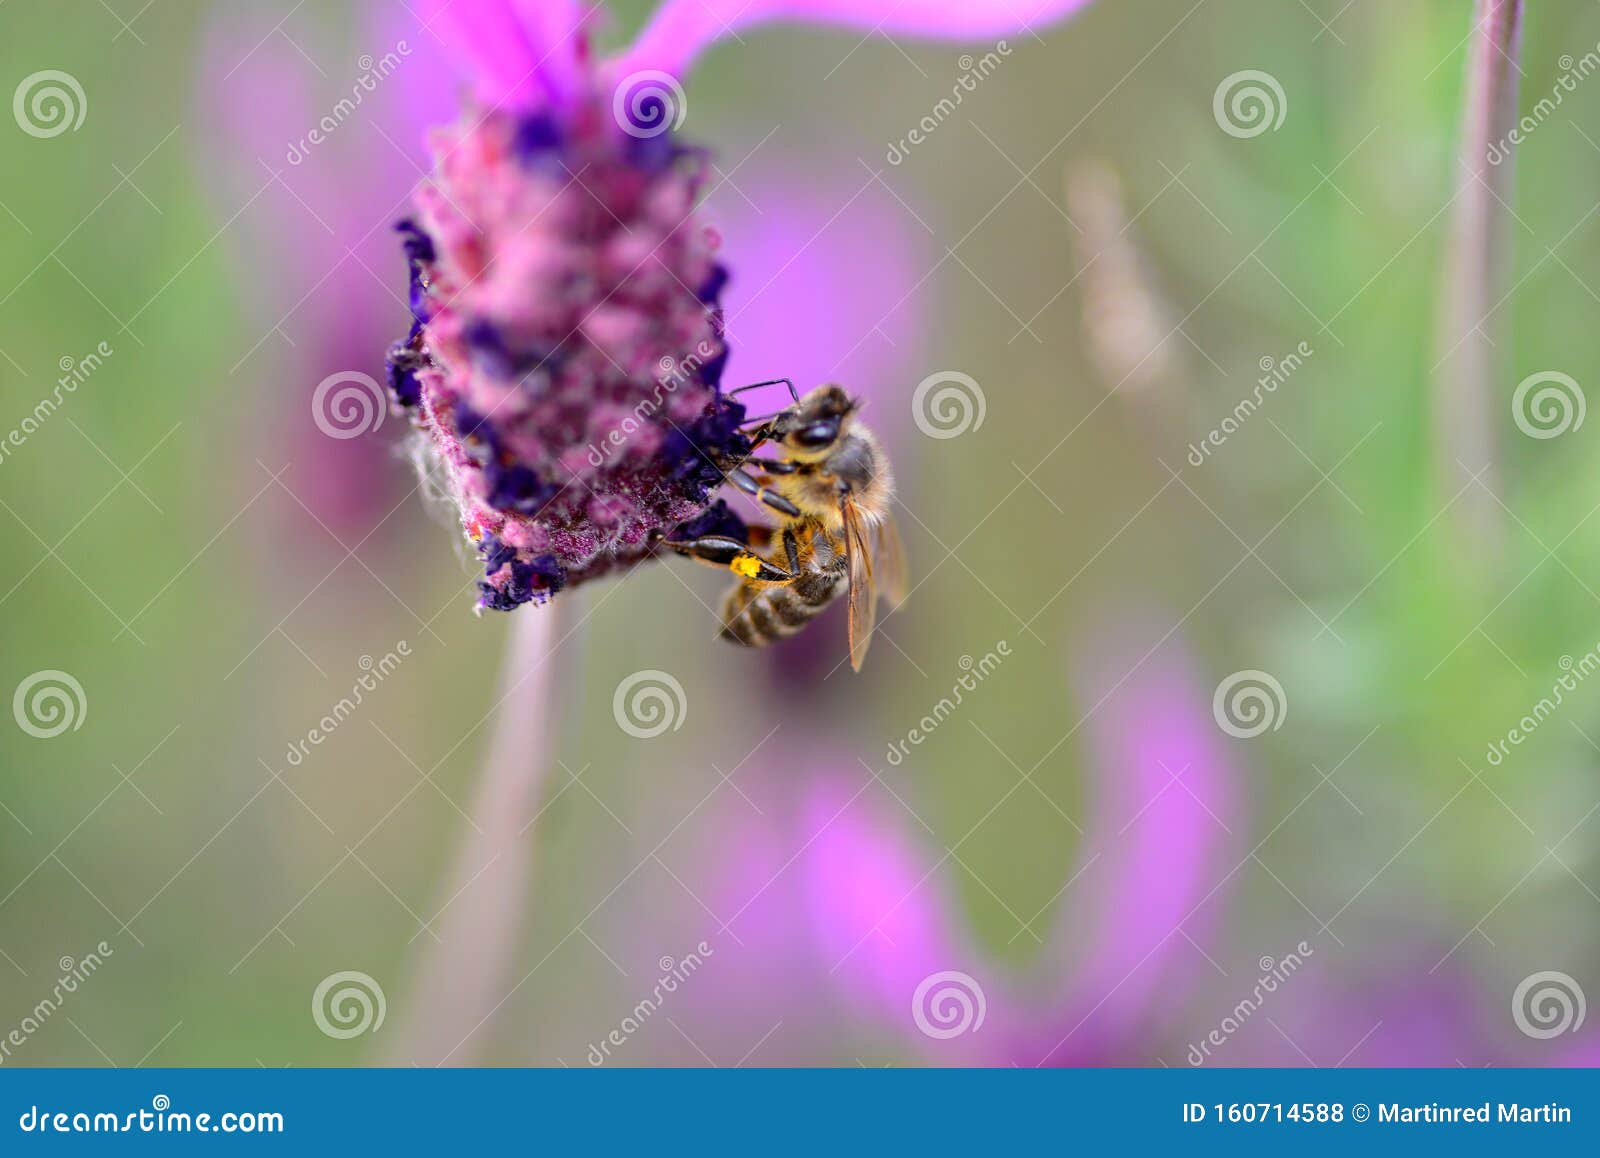 bee looking for honey and pollen on lavender plant